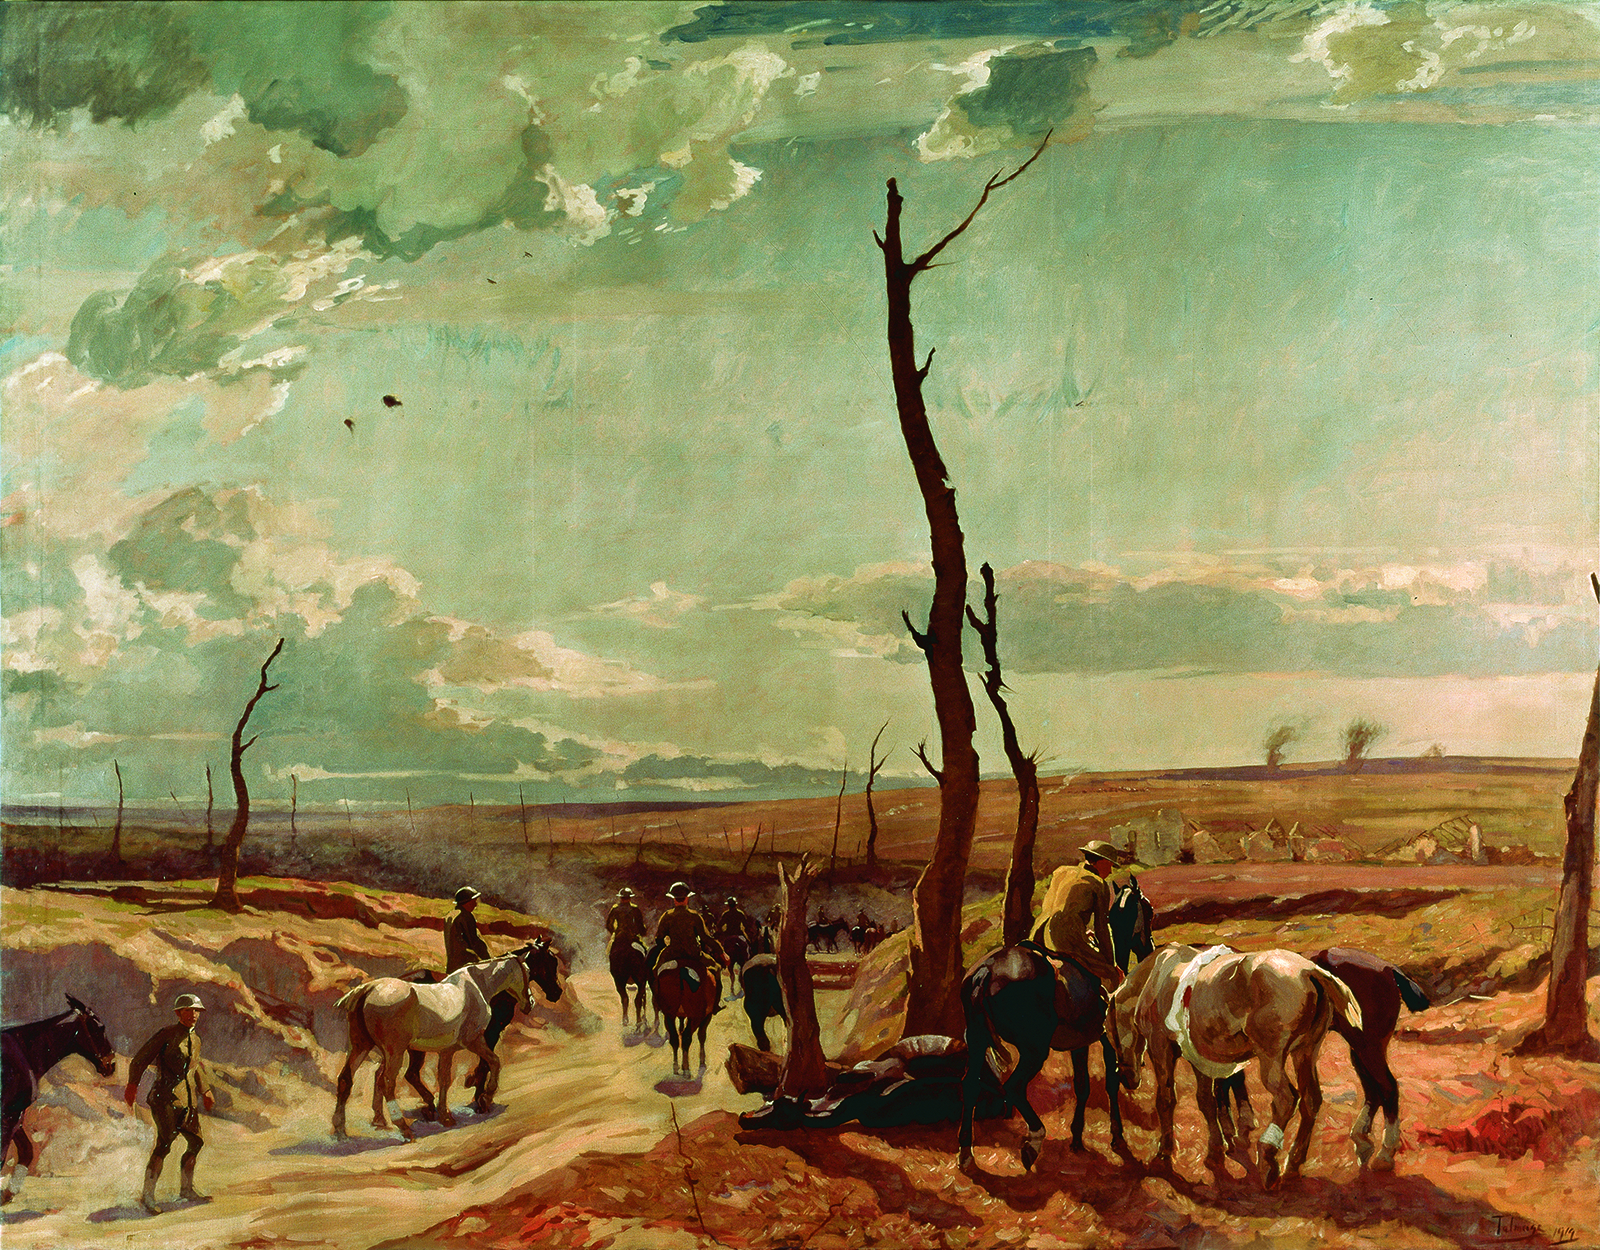 British artist Algernon Talmage painted Canadian soldiers in a mobile veterinary unit, evacuating wounded horses during the First Battle of Cambrai in the autumn of 1917. Tanks were deployed in massive formations at Cambrai but horses remained essential for hauling supplies and transporting the wounded. (Beaverbrook Collection of War Art, Canadian War Museum, CWM 19710261-0596)